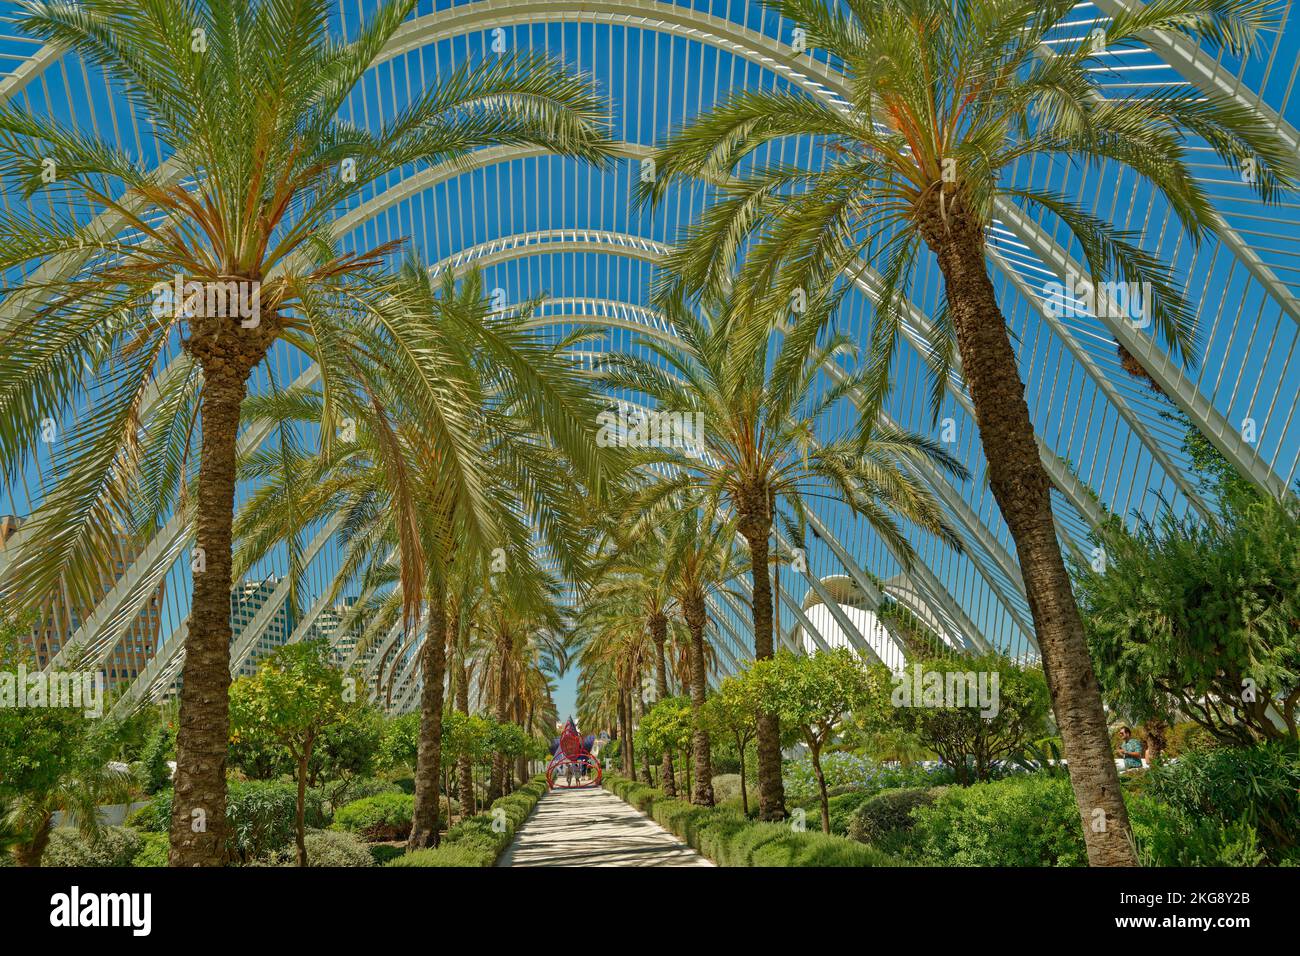 The Umbracle arches at the Valencia City of Culture in Valencia Province, Spain. Stock Photo